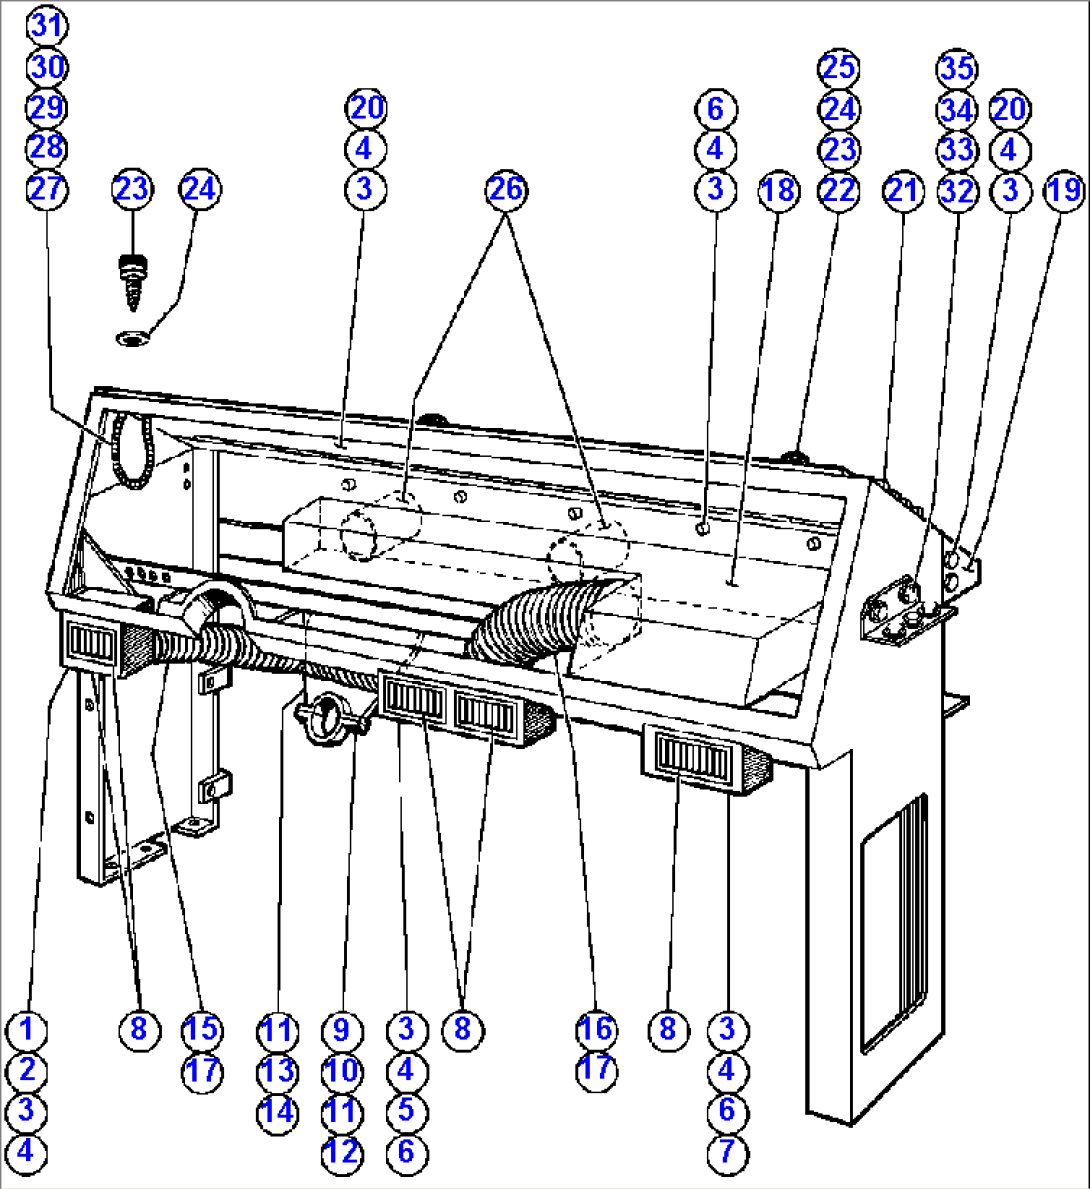 CONSOLE ASSEMBLY (PB7515)